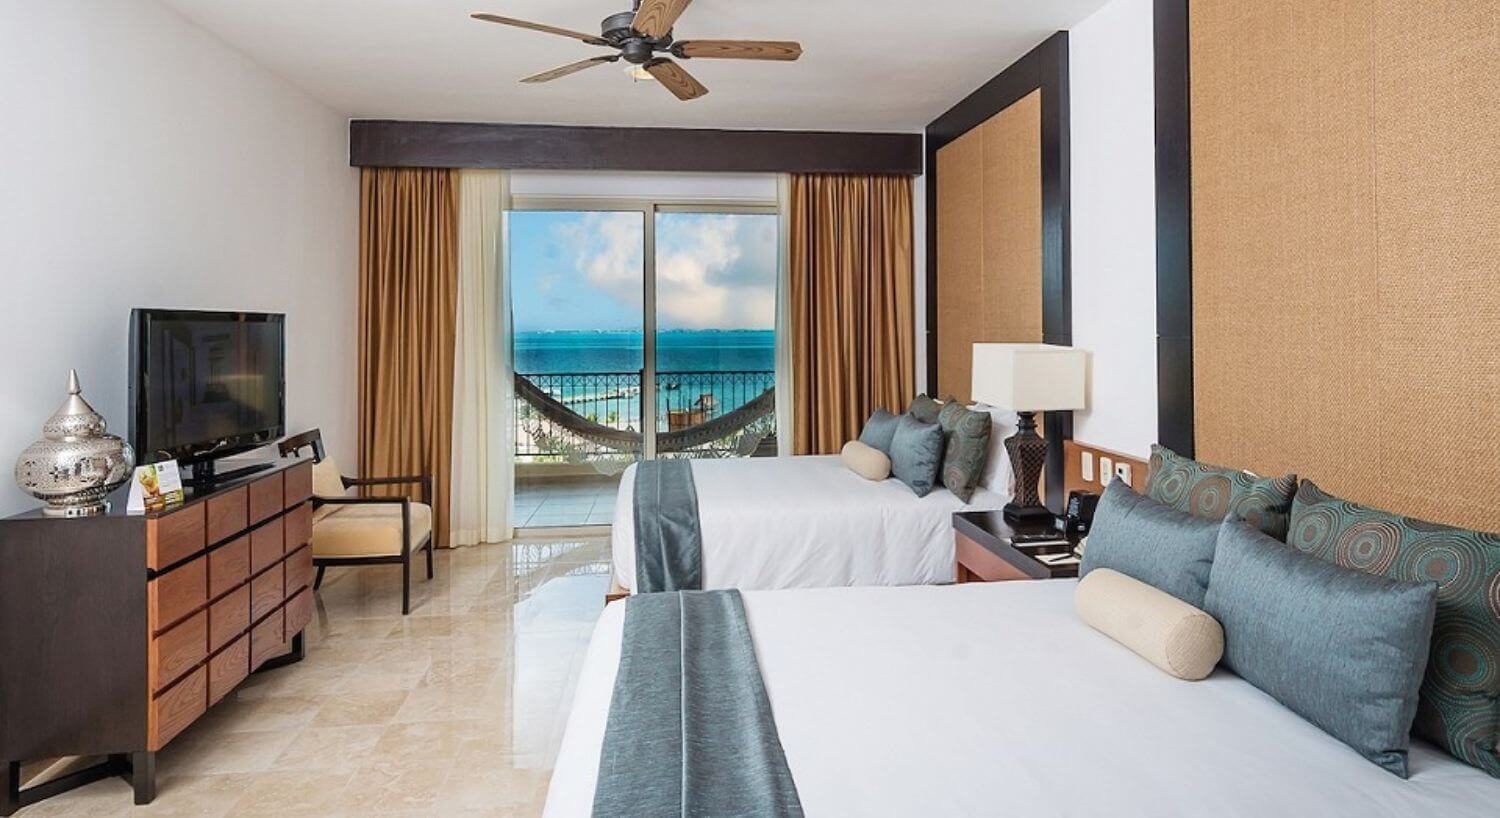 A bedroom with two queen beds with white and blue bedding, a nightstand and lamp in between the beds, a dresser and flat screen TV on the opposite wall, an armchair next to the dresser, and sliding doors leading out to a private terrace with balcony and beautiful turquoise ocean views.